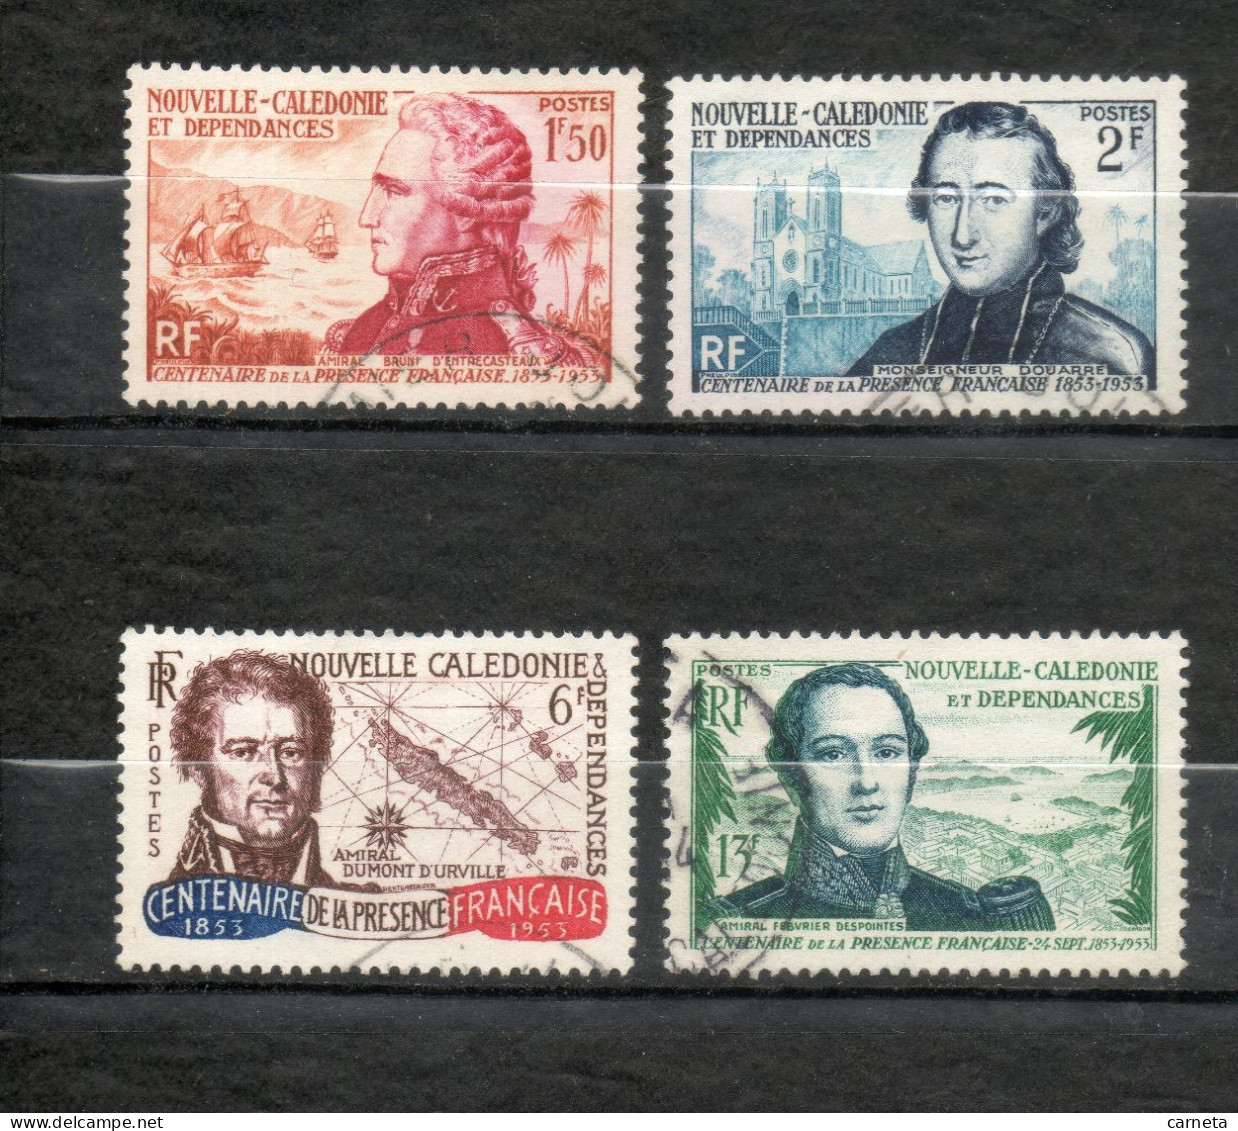 Nlle CALEDONIE N° 280 à 283   OBLITERES   COTE 28.00€    CELEBRITE AMIRAL - Used Stamps